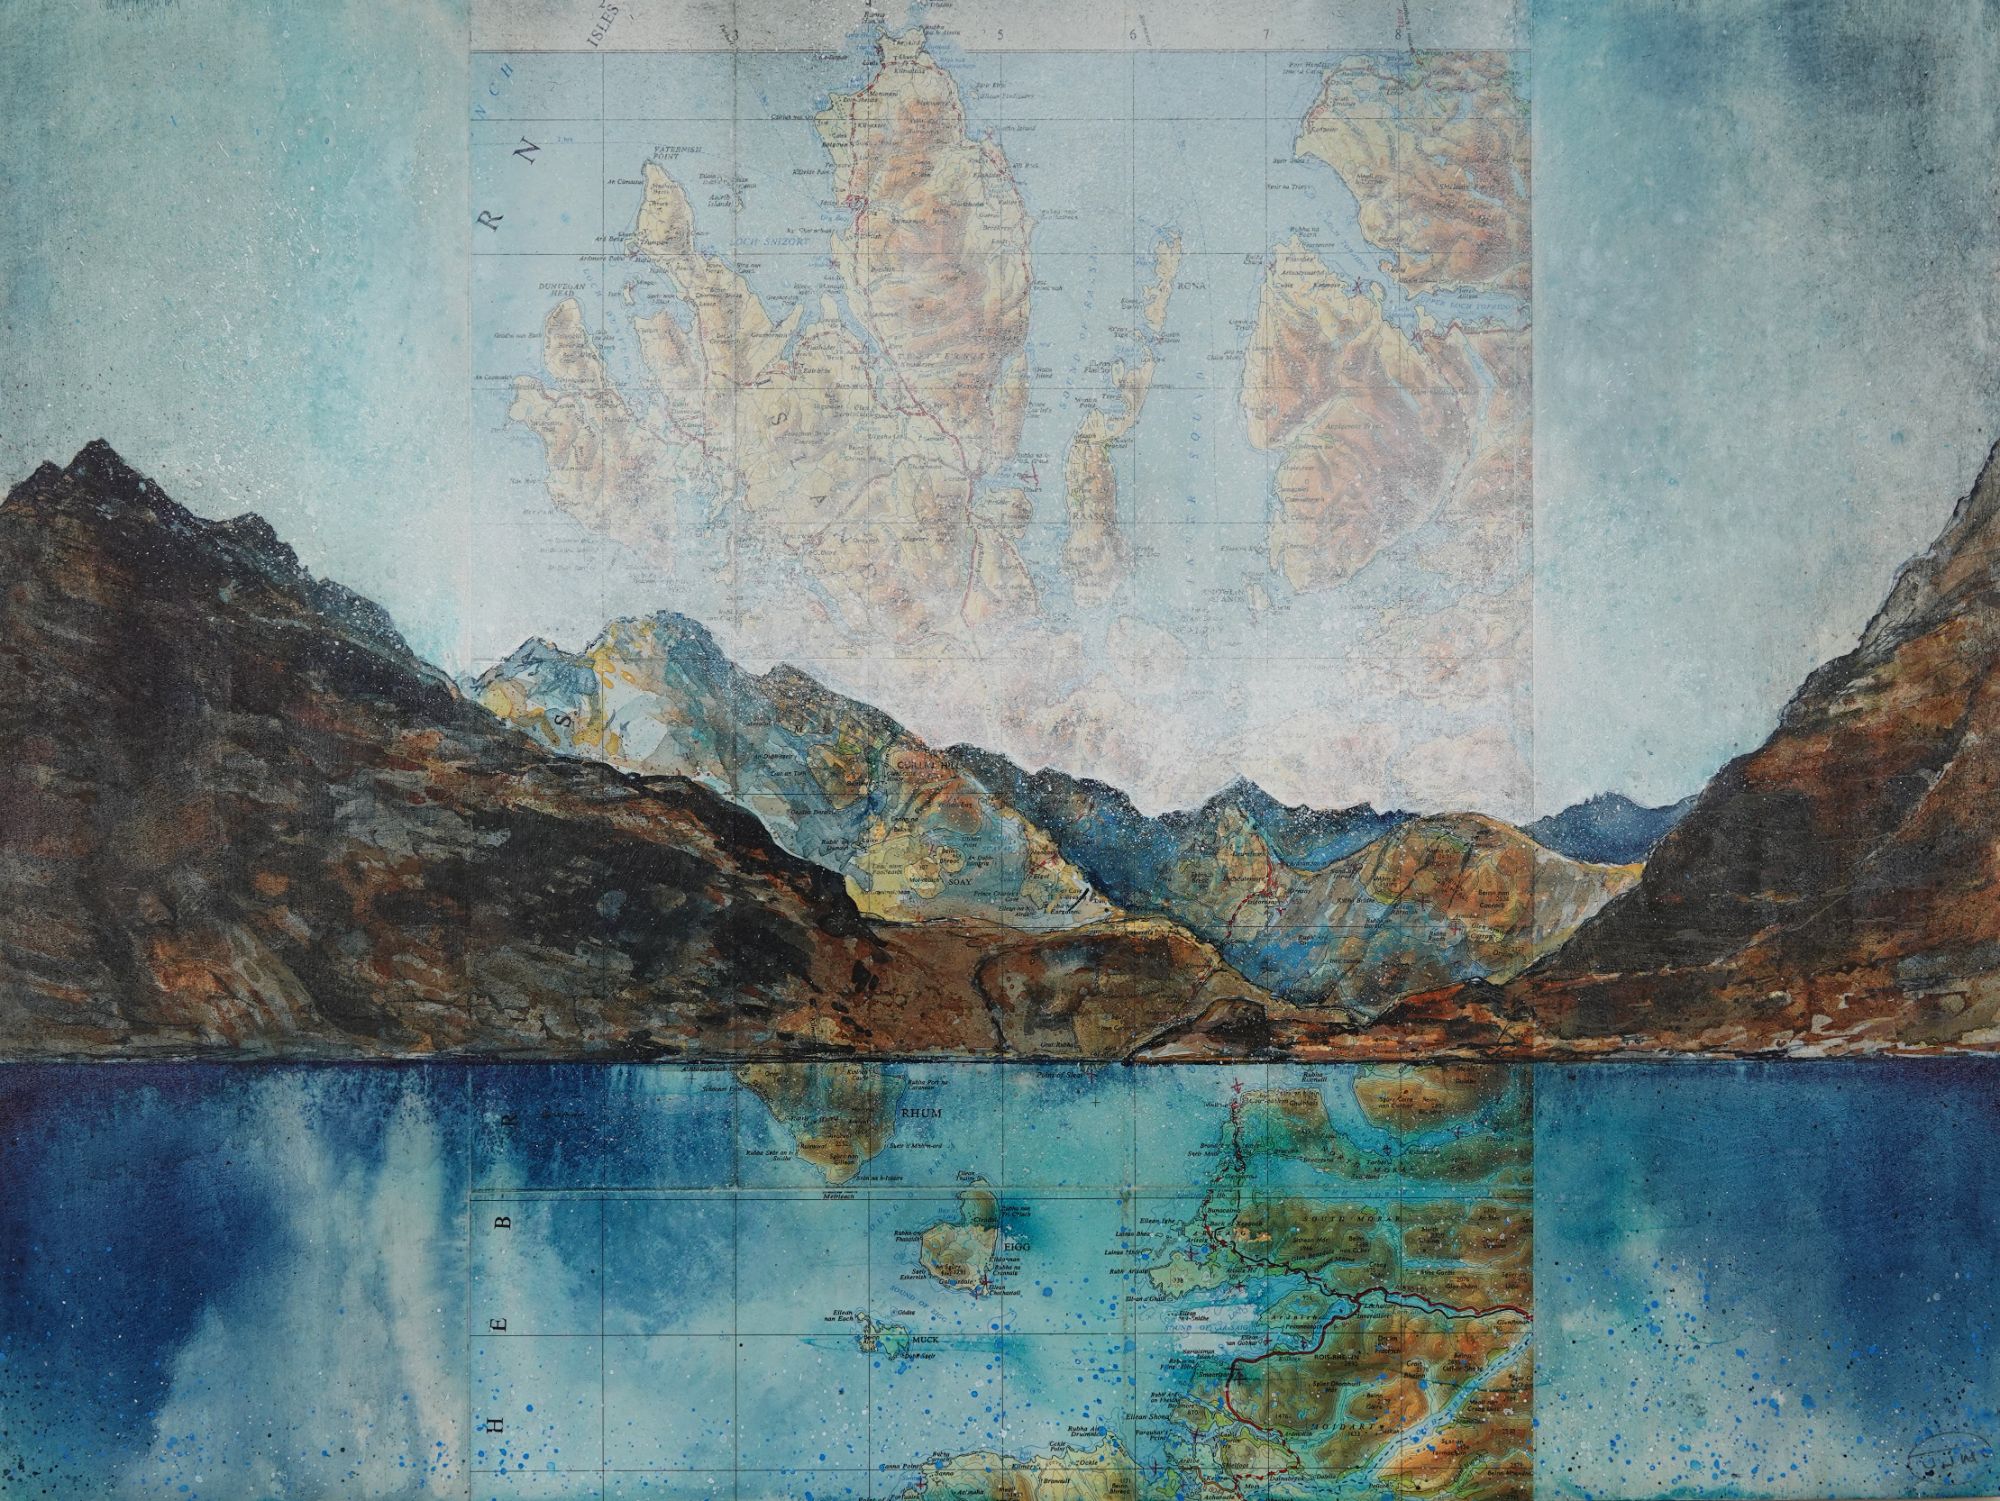 SHELTERED BY MOUNTAINS ( ENTRANCE TO LOCH CORUISK) acrylic ink, graphite pencil on original map, wood panel 46x61cm Â£850.JPG